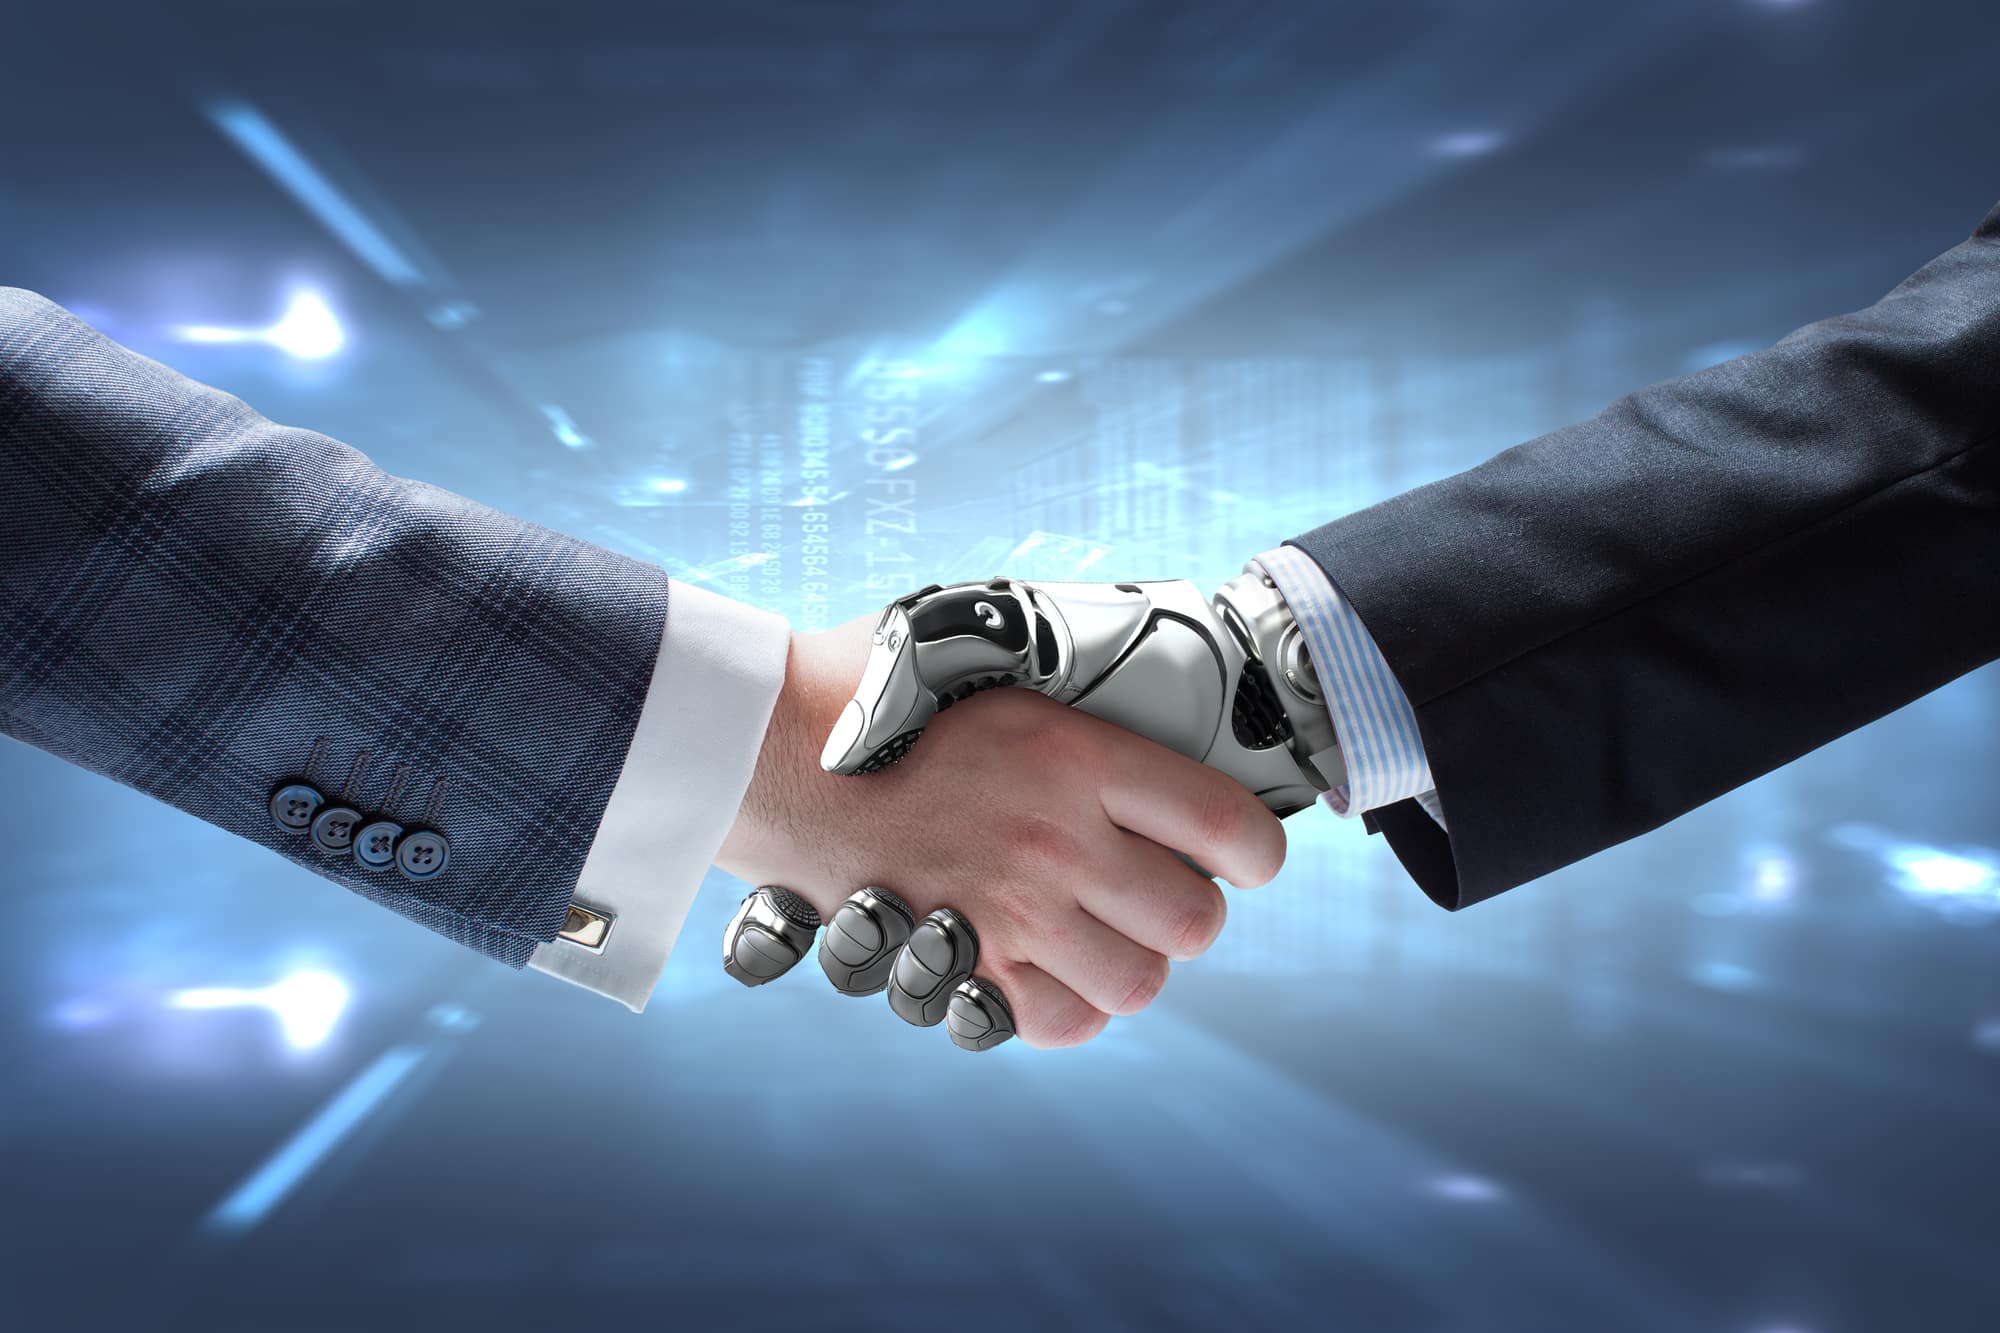 A graphic of a human and robot shaking hands, both dressed in professional clothing.